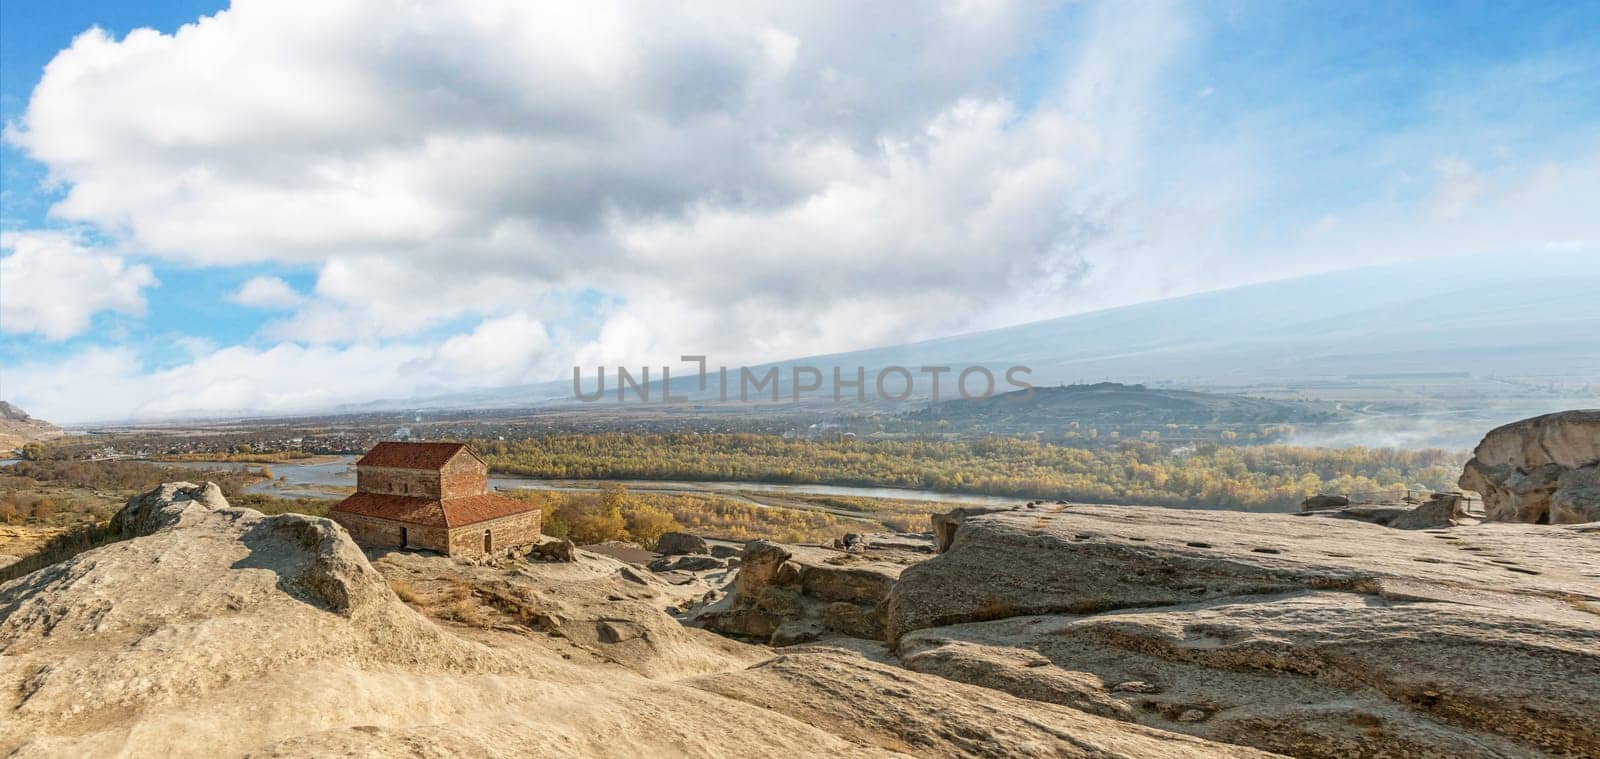 Panoramic view of the rock-hewn town of Uplistsikhe overlooking the distant city and river